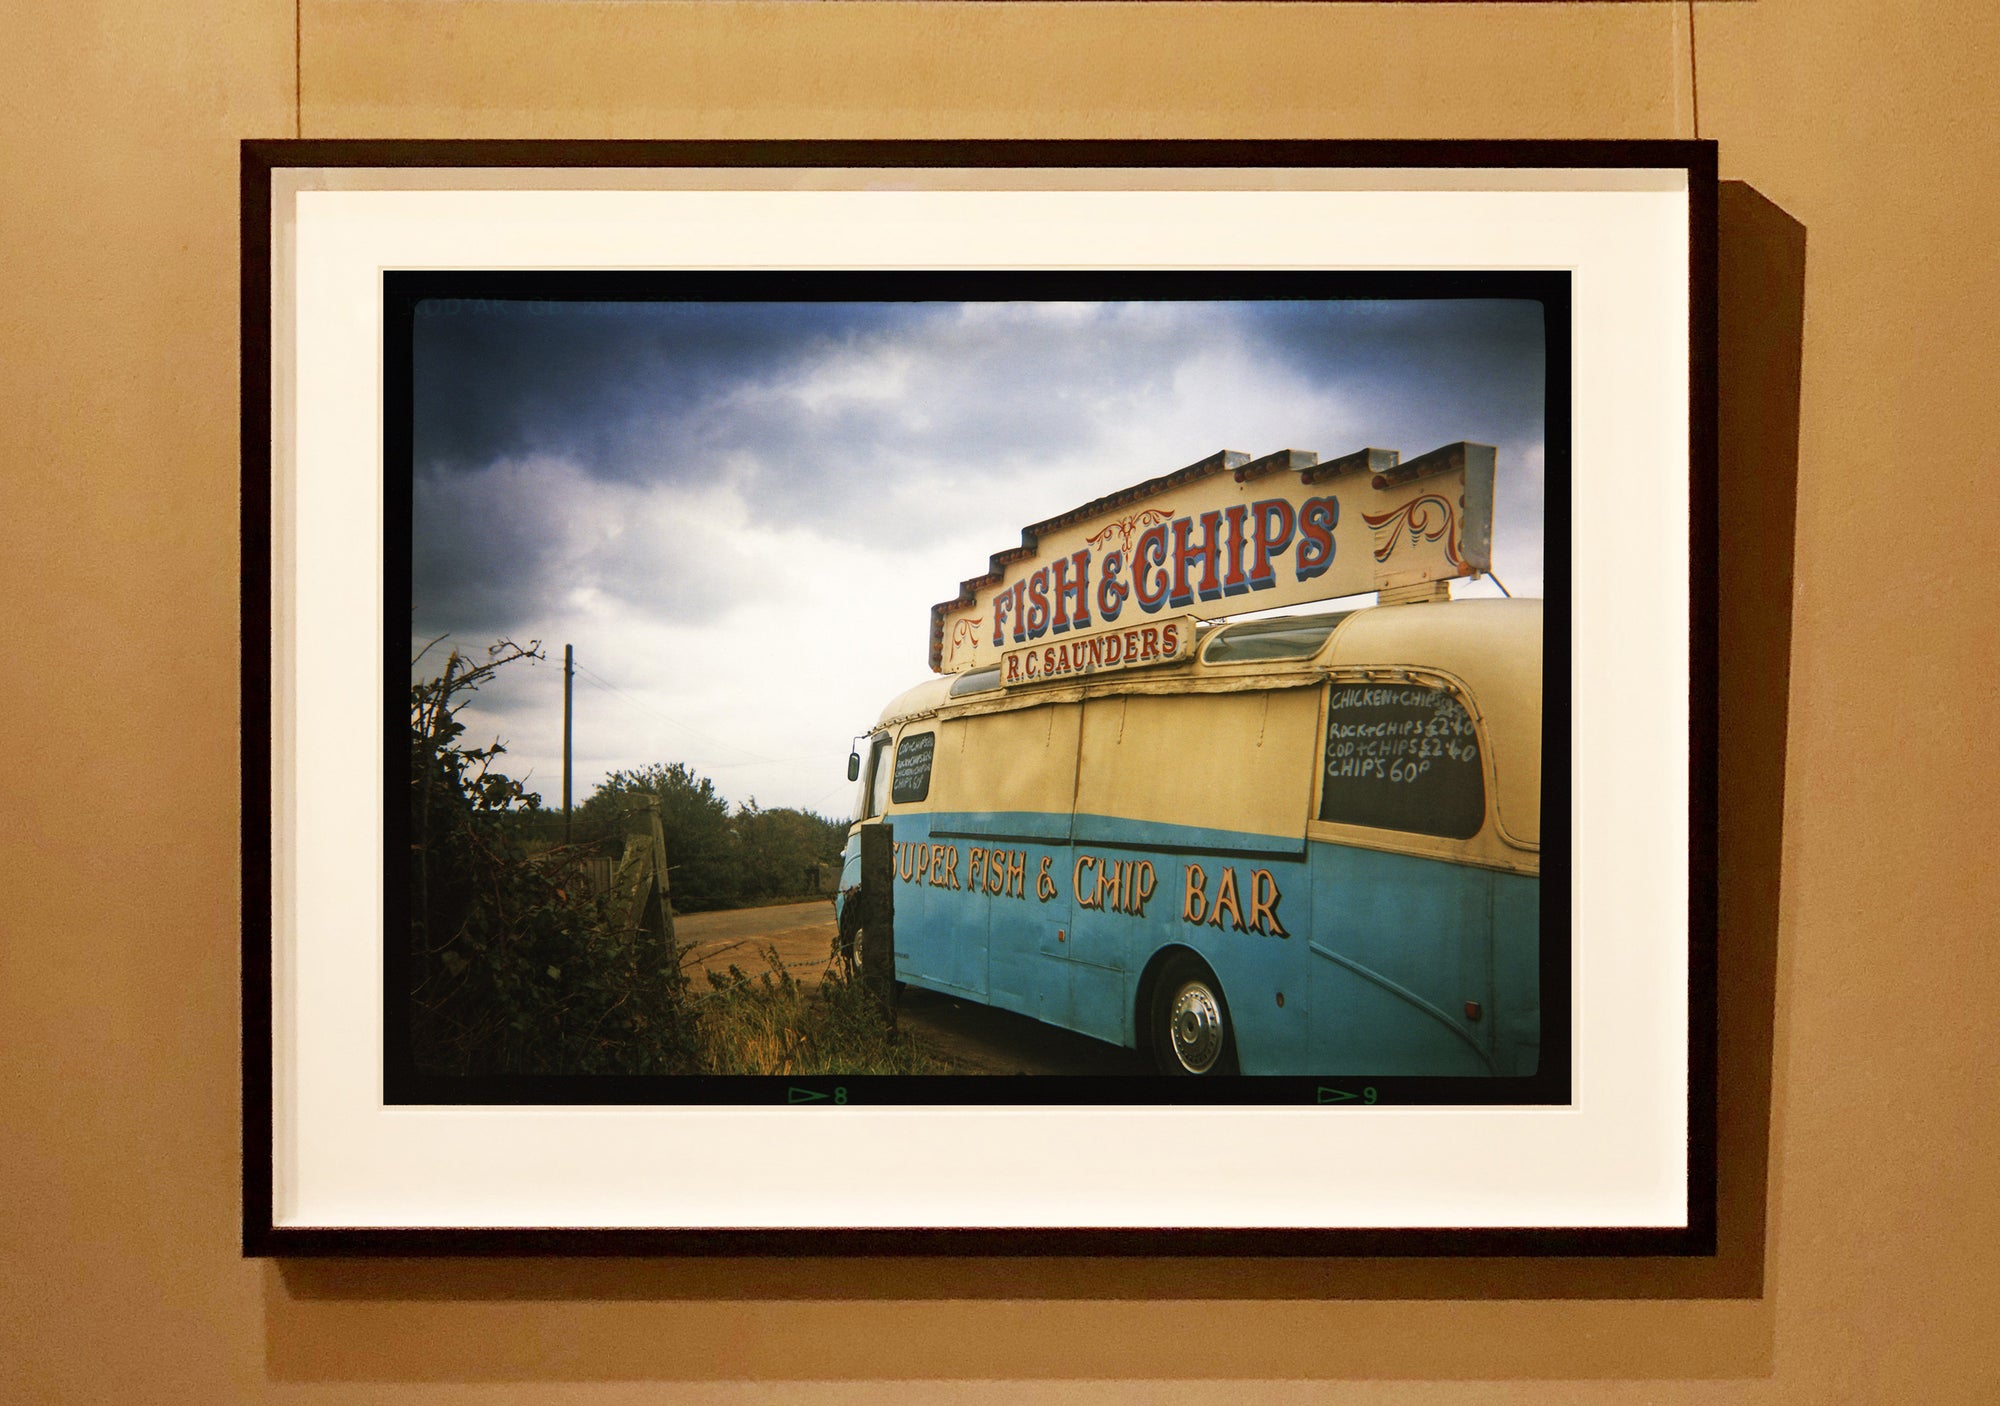 A moody Fenland sky is backdrop to a classic British Fish & Chips Van. The typography and the van itself has a fun fairground feel, contrary to the muted tones of this piece. Part of Richard Heeps series, 'A View of the Fens from the Car with Wings'.